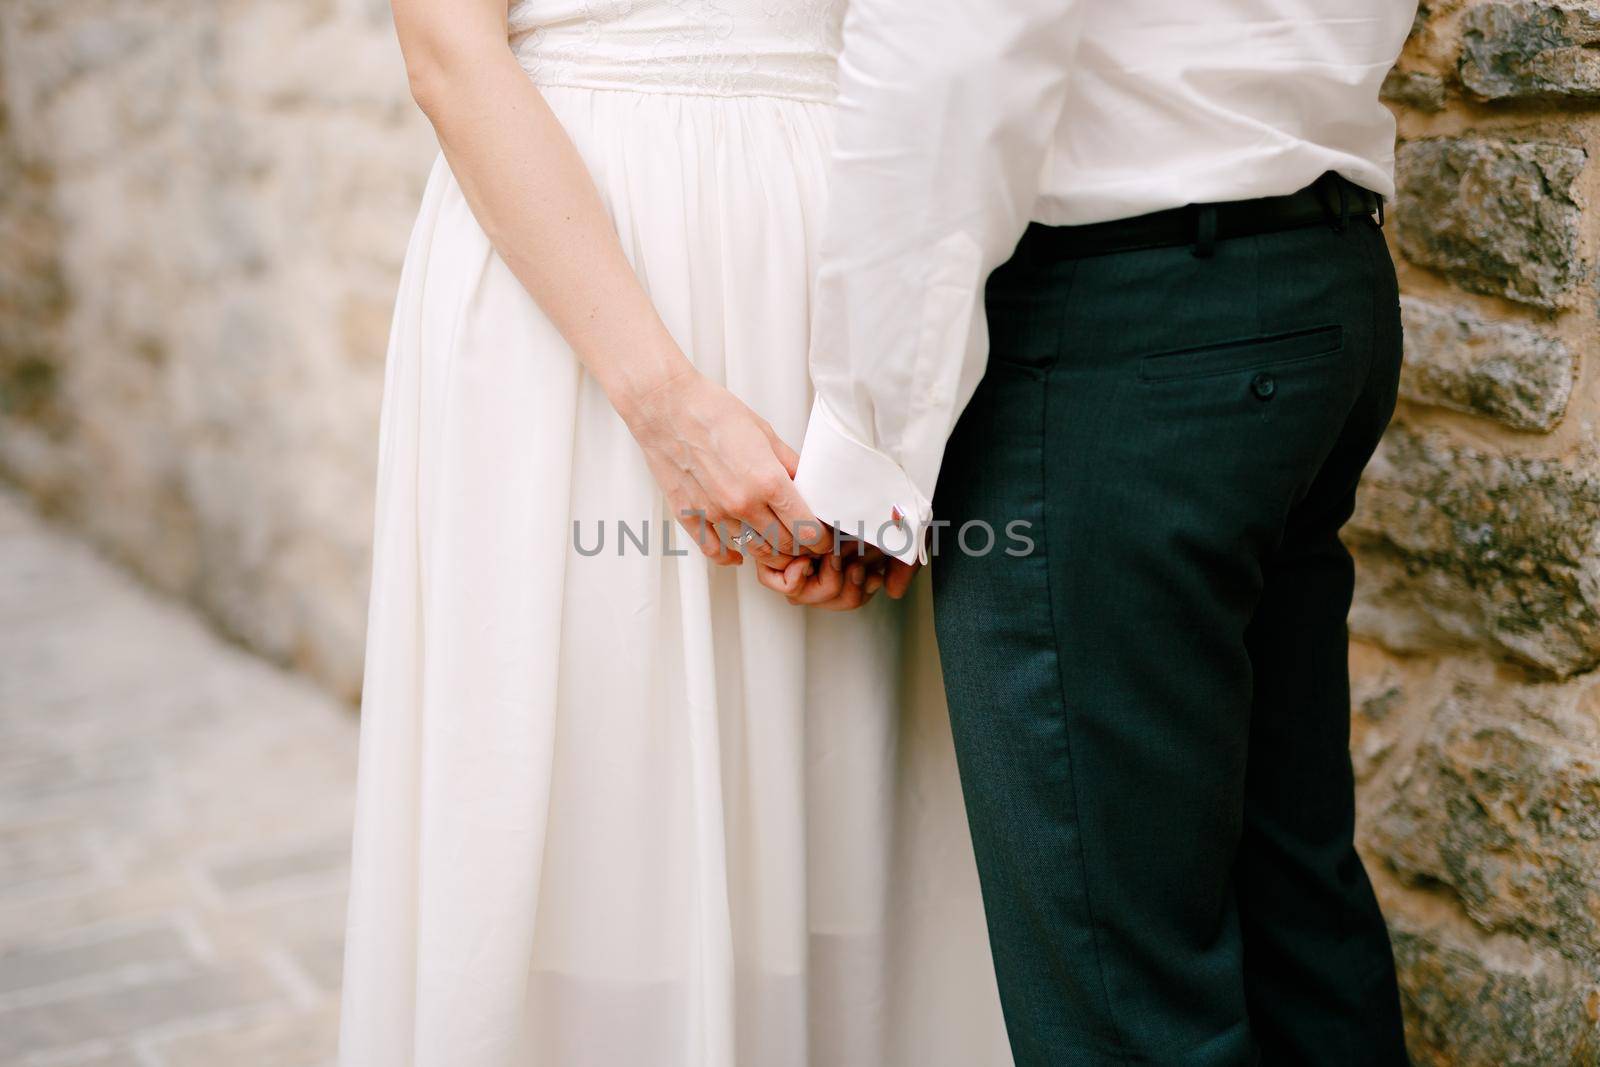 The bride and groom stand near a stone wall and touchingly hold each other's hands, close-up by Nadtochiy